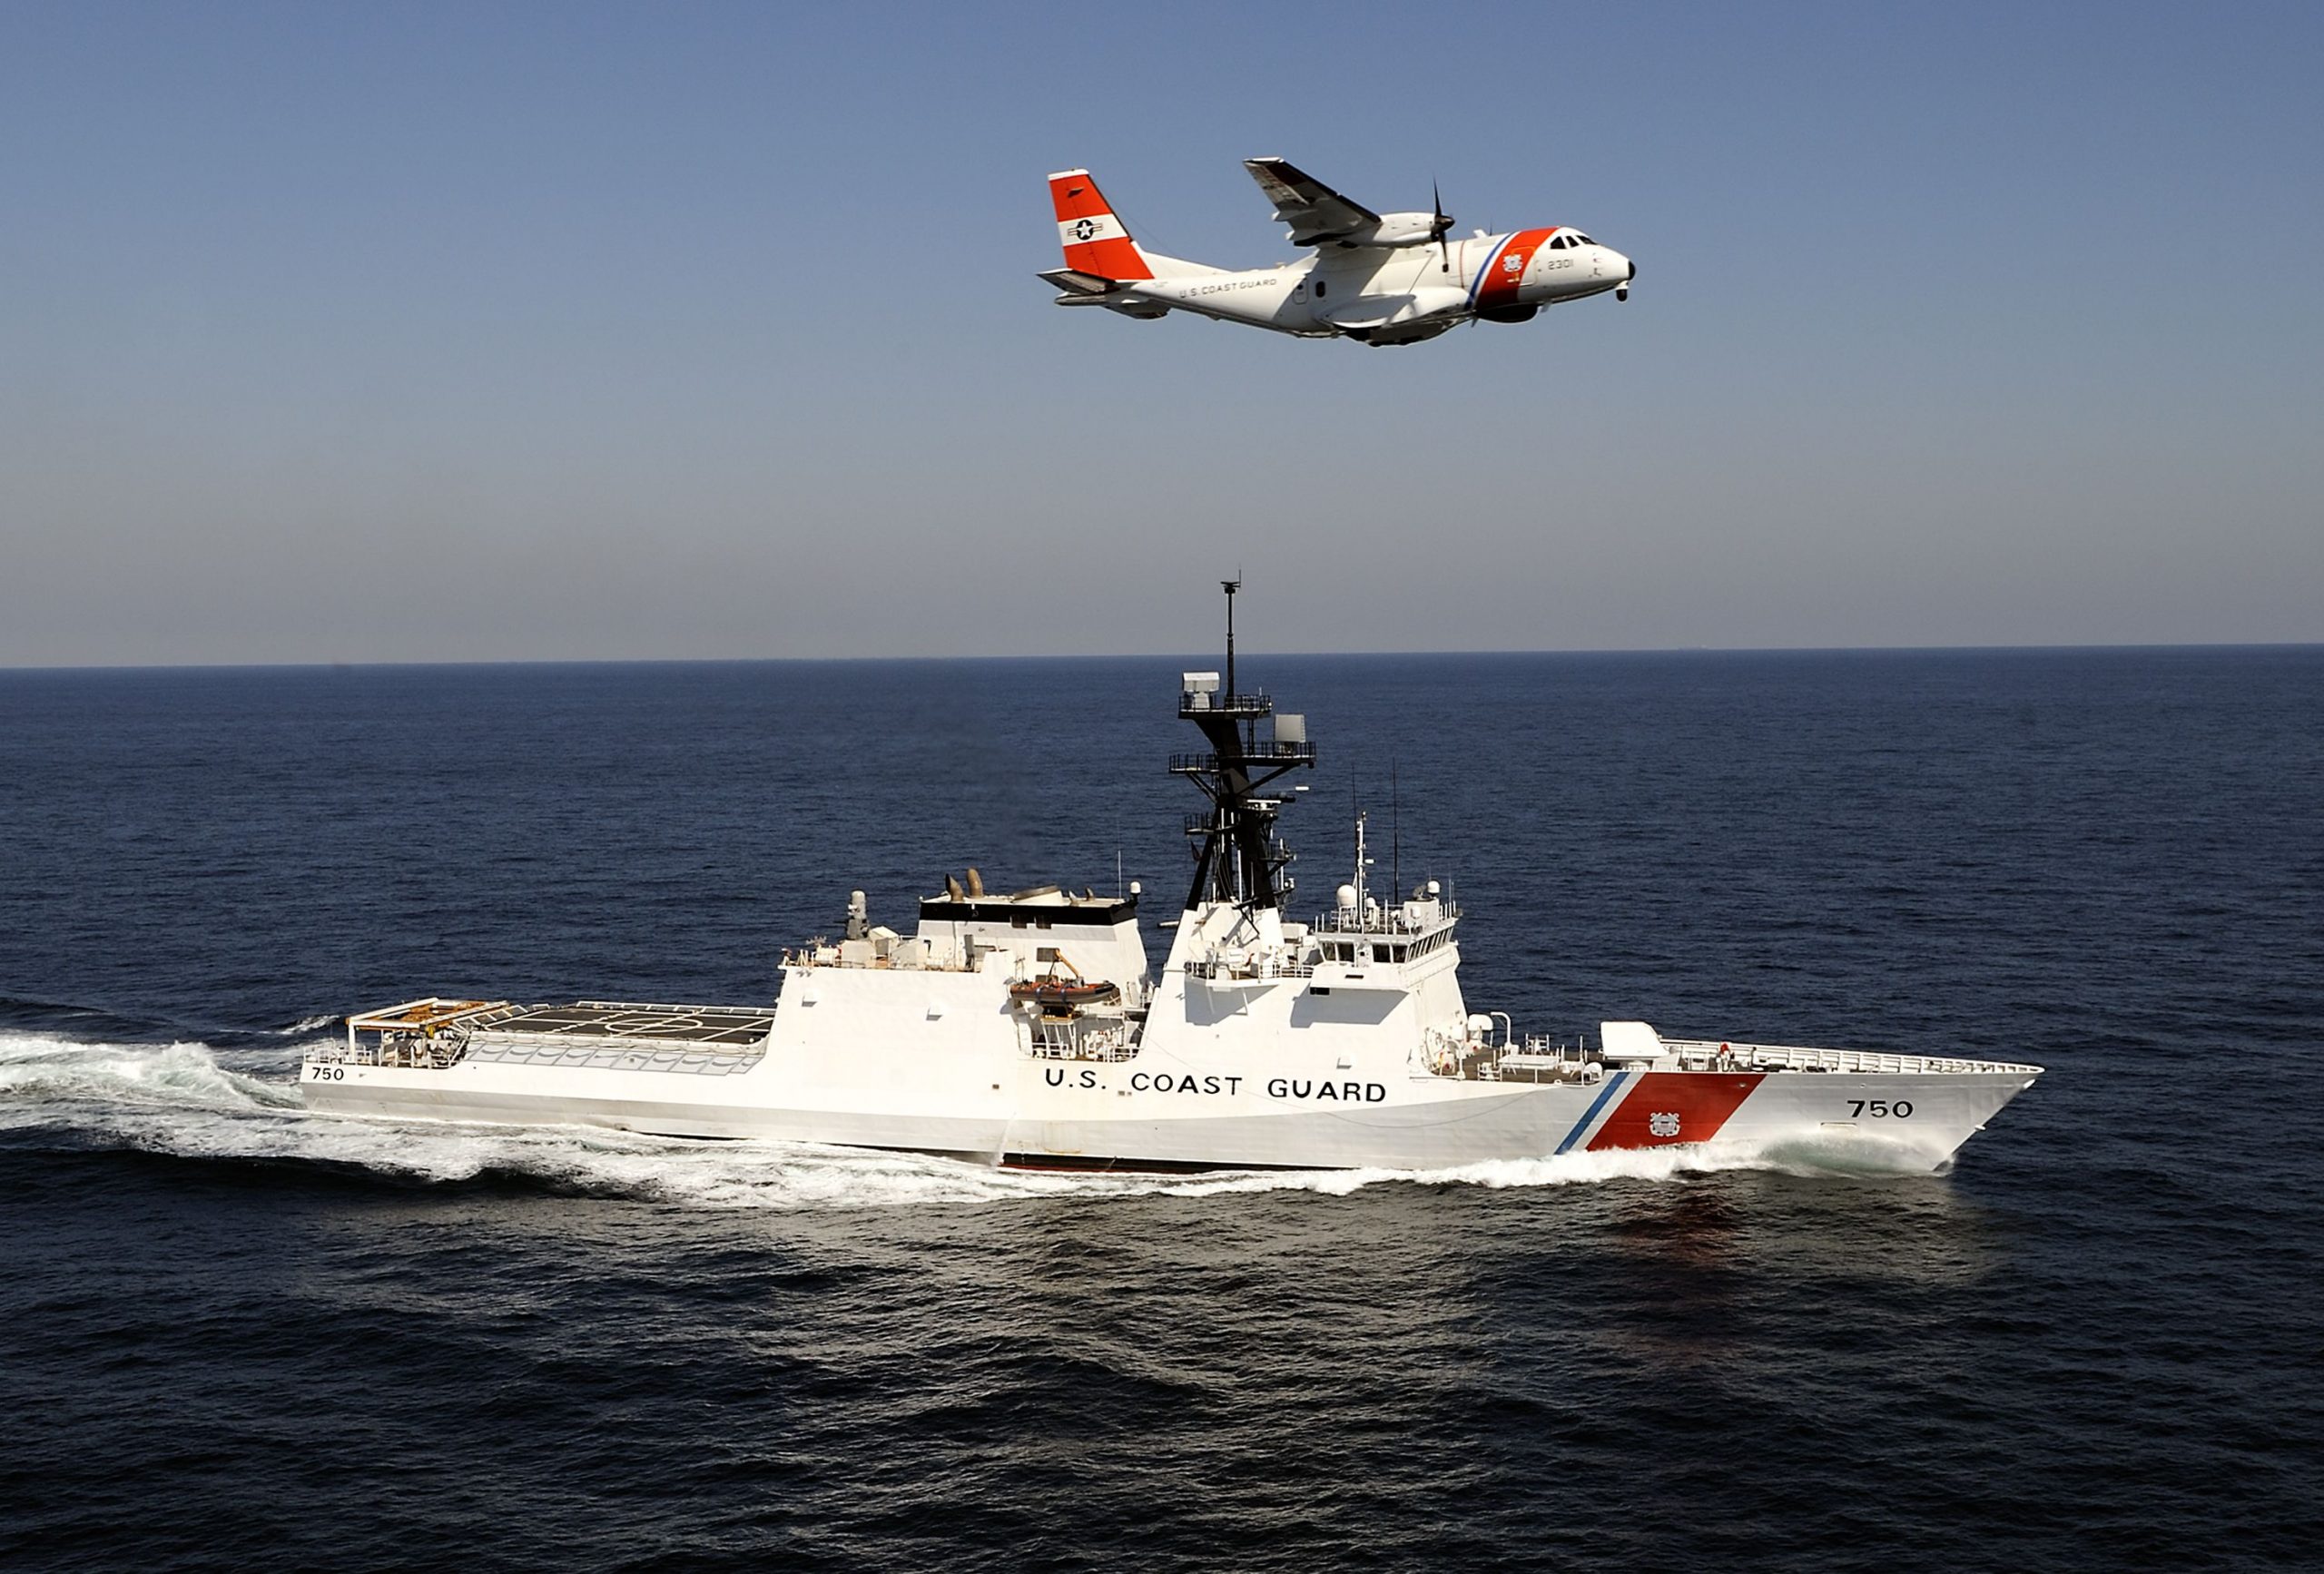 Protection Features of Coast Guard Boats